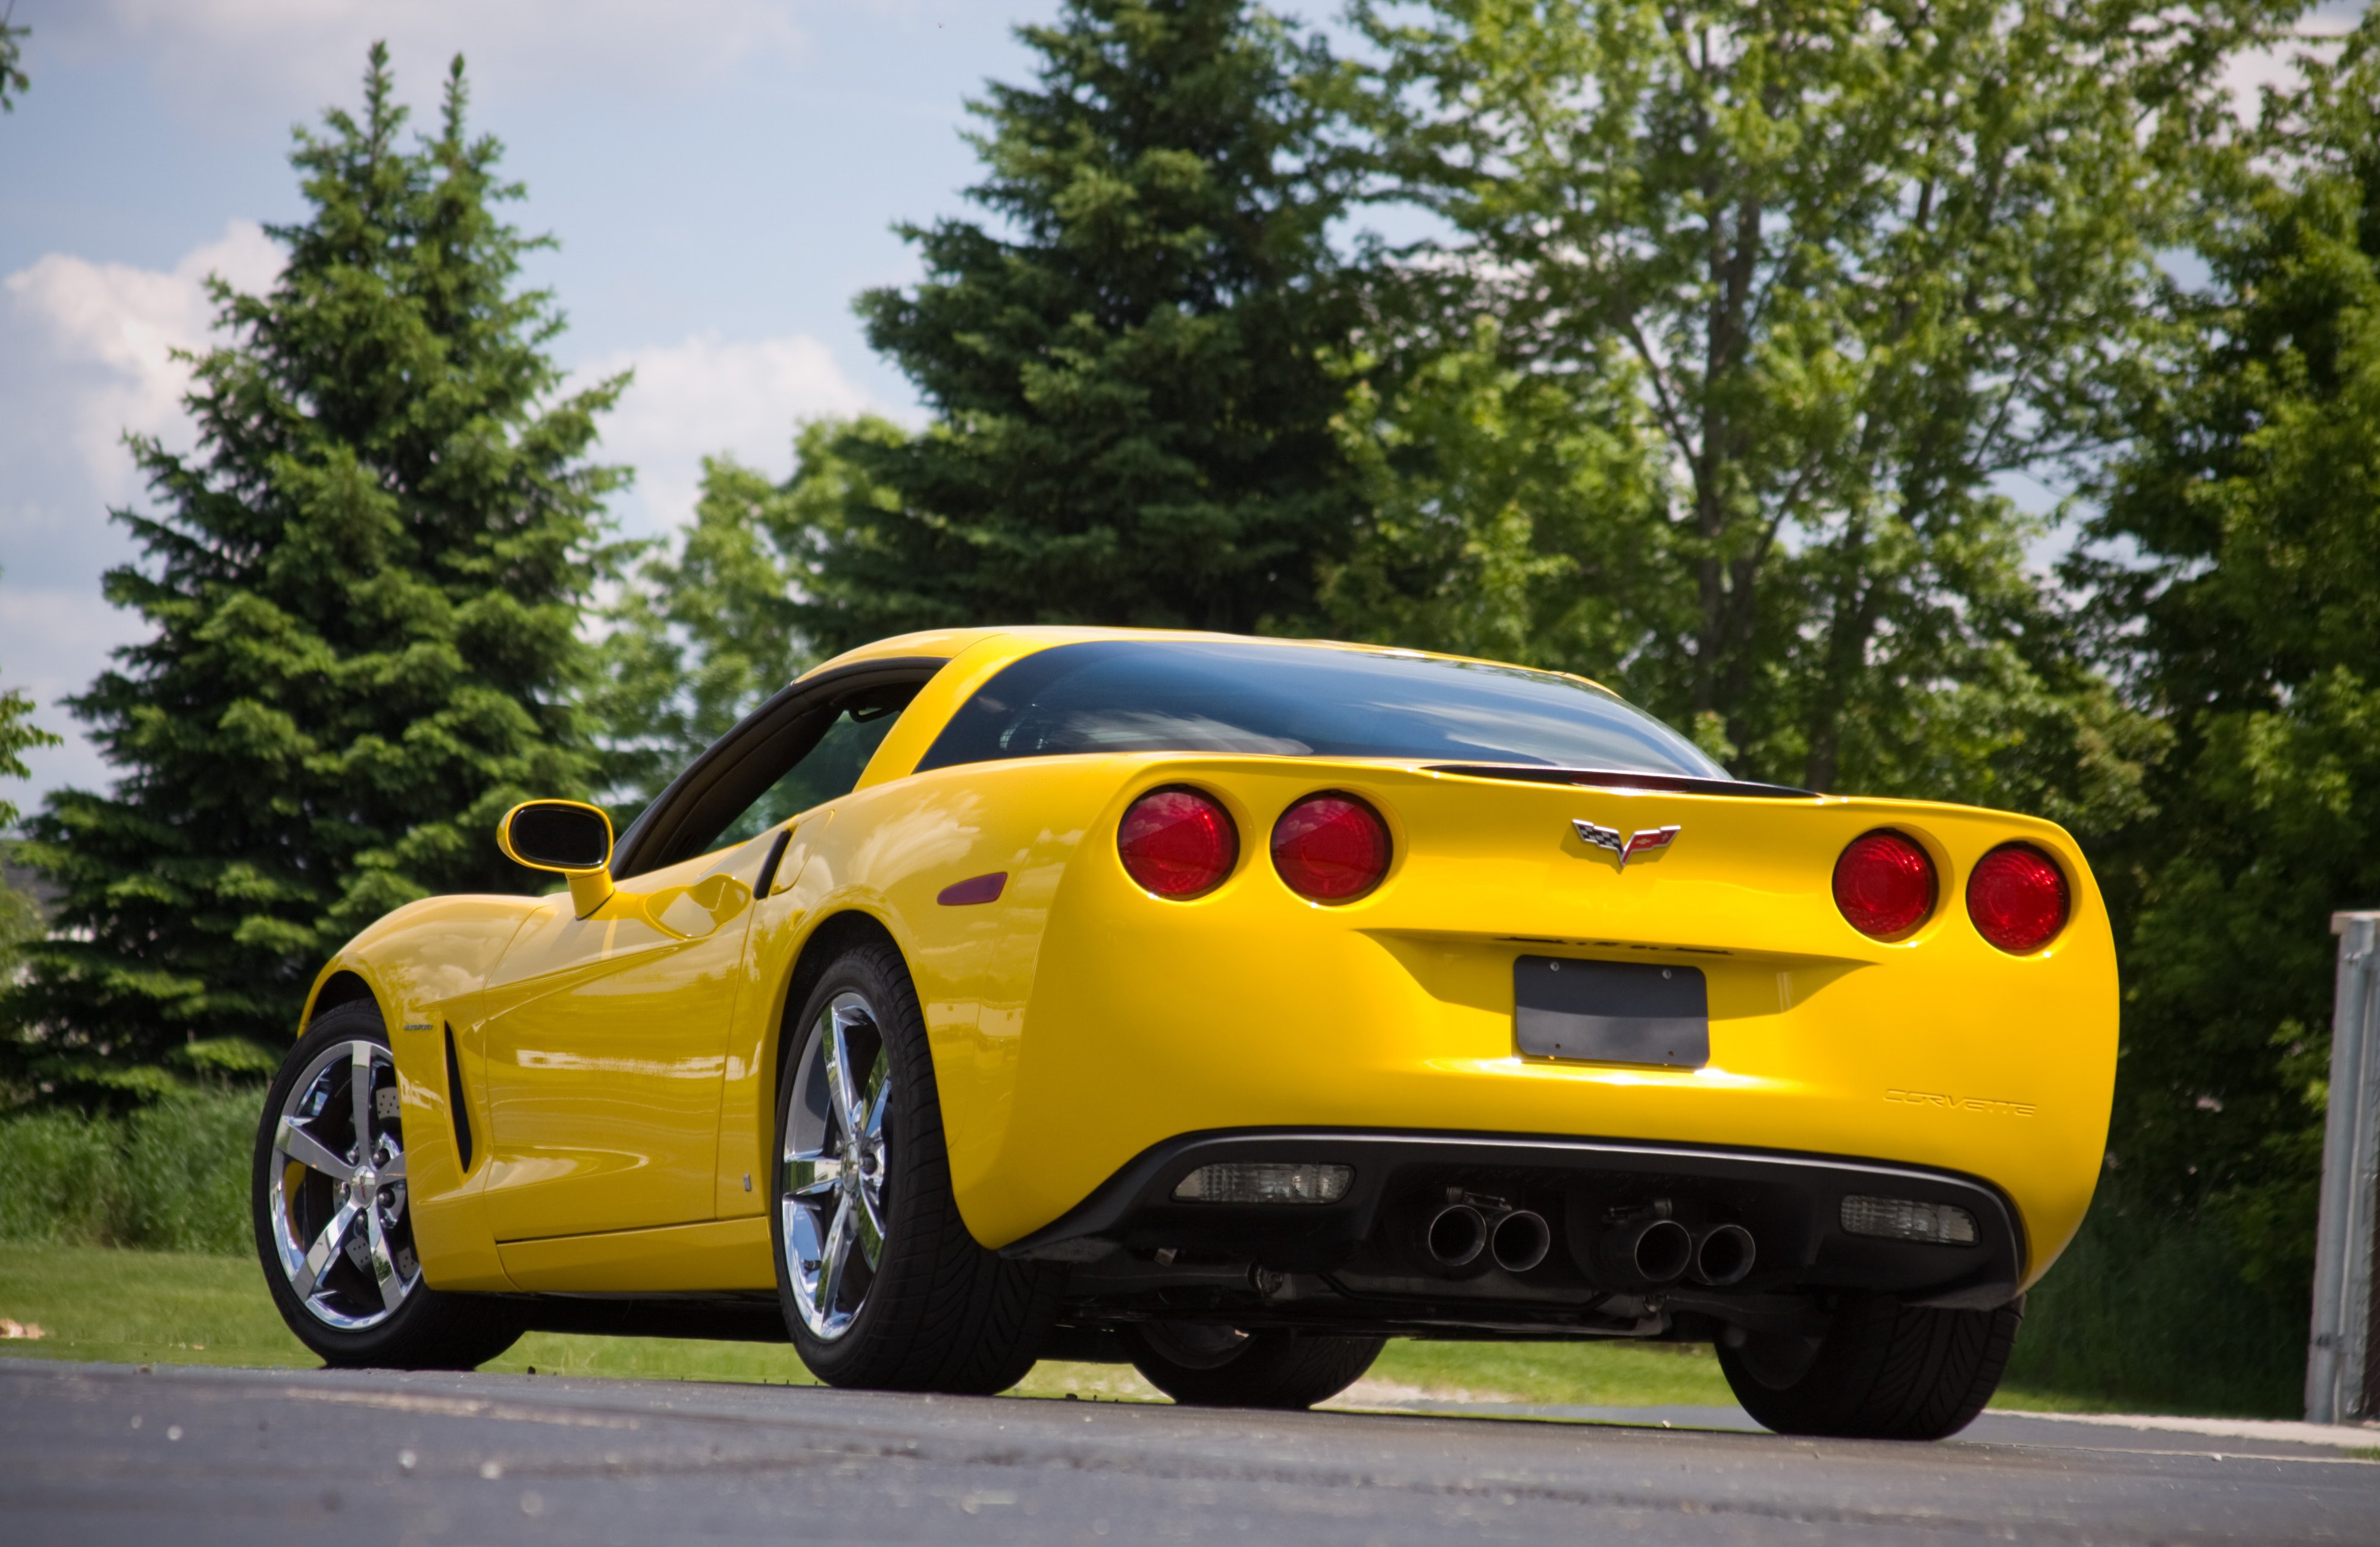 Chevrolet Corvette C6 Yellow Lingenfelter Hp Supercharged Ls3